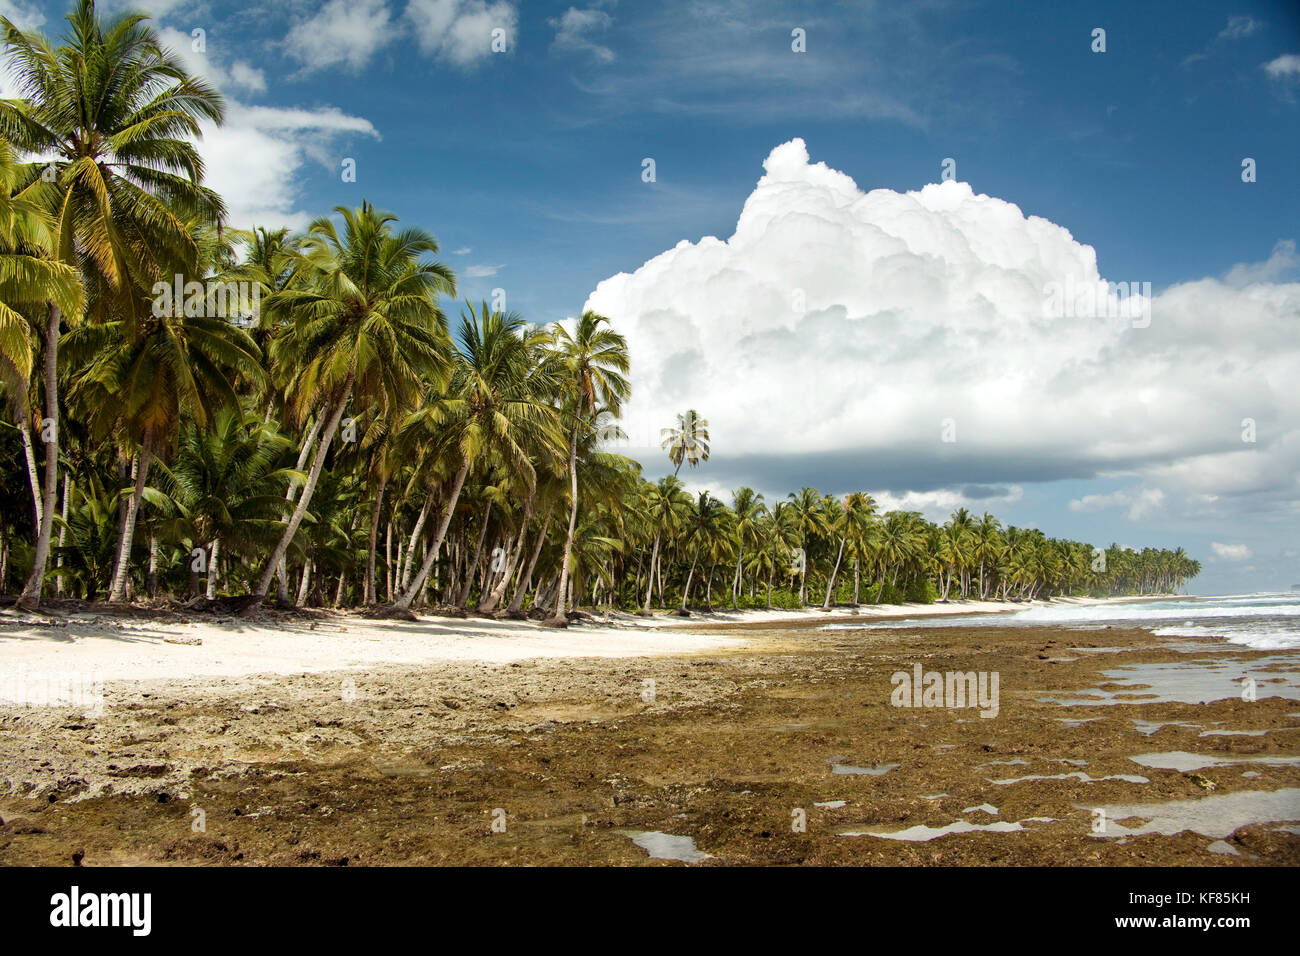 INDONESIA, Mentawai Islands, palm trees with island against cloudy sky Stock Photo